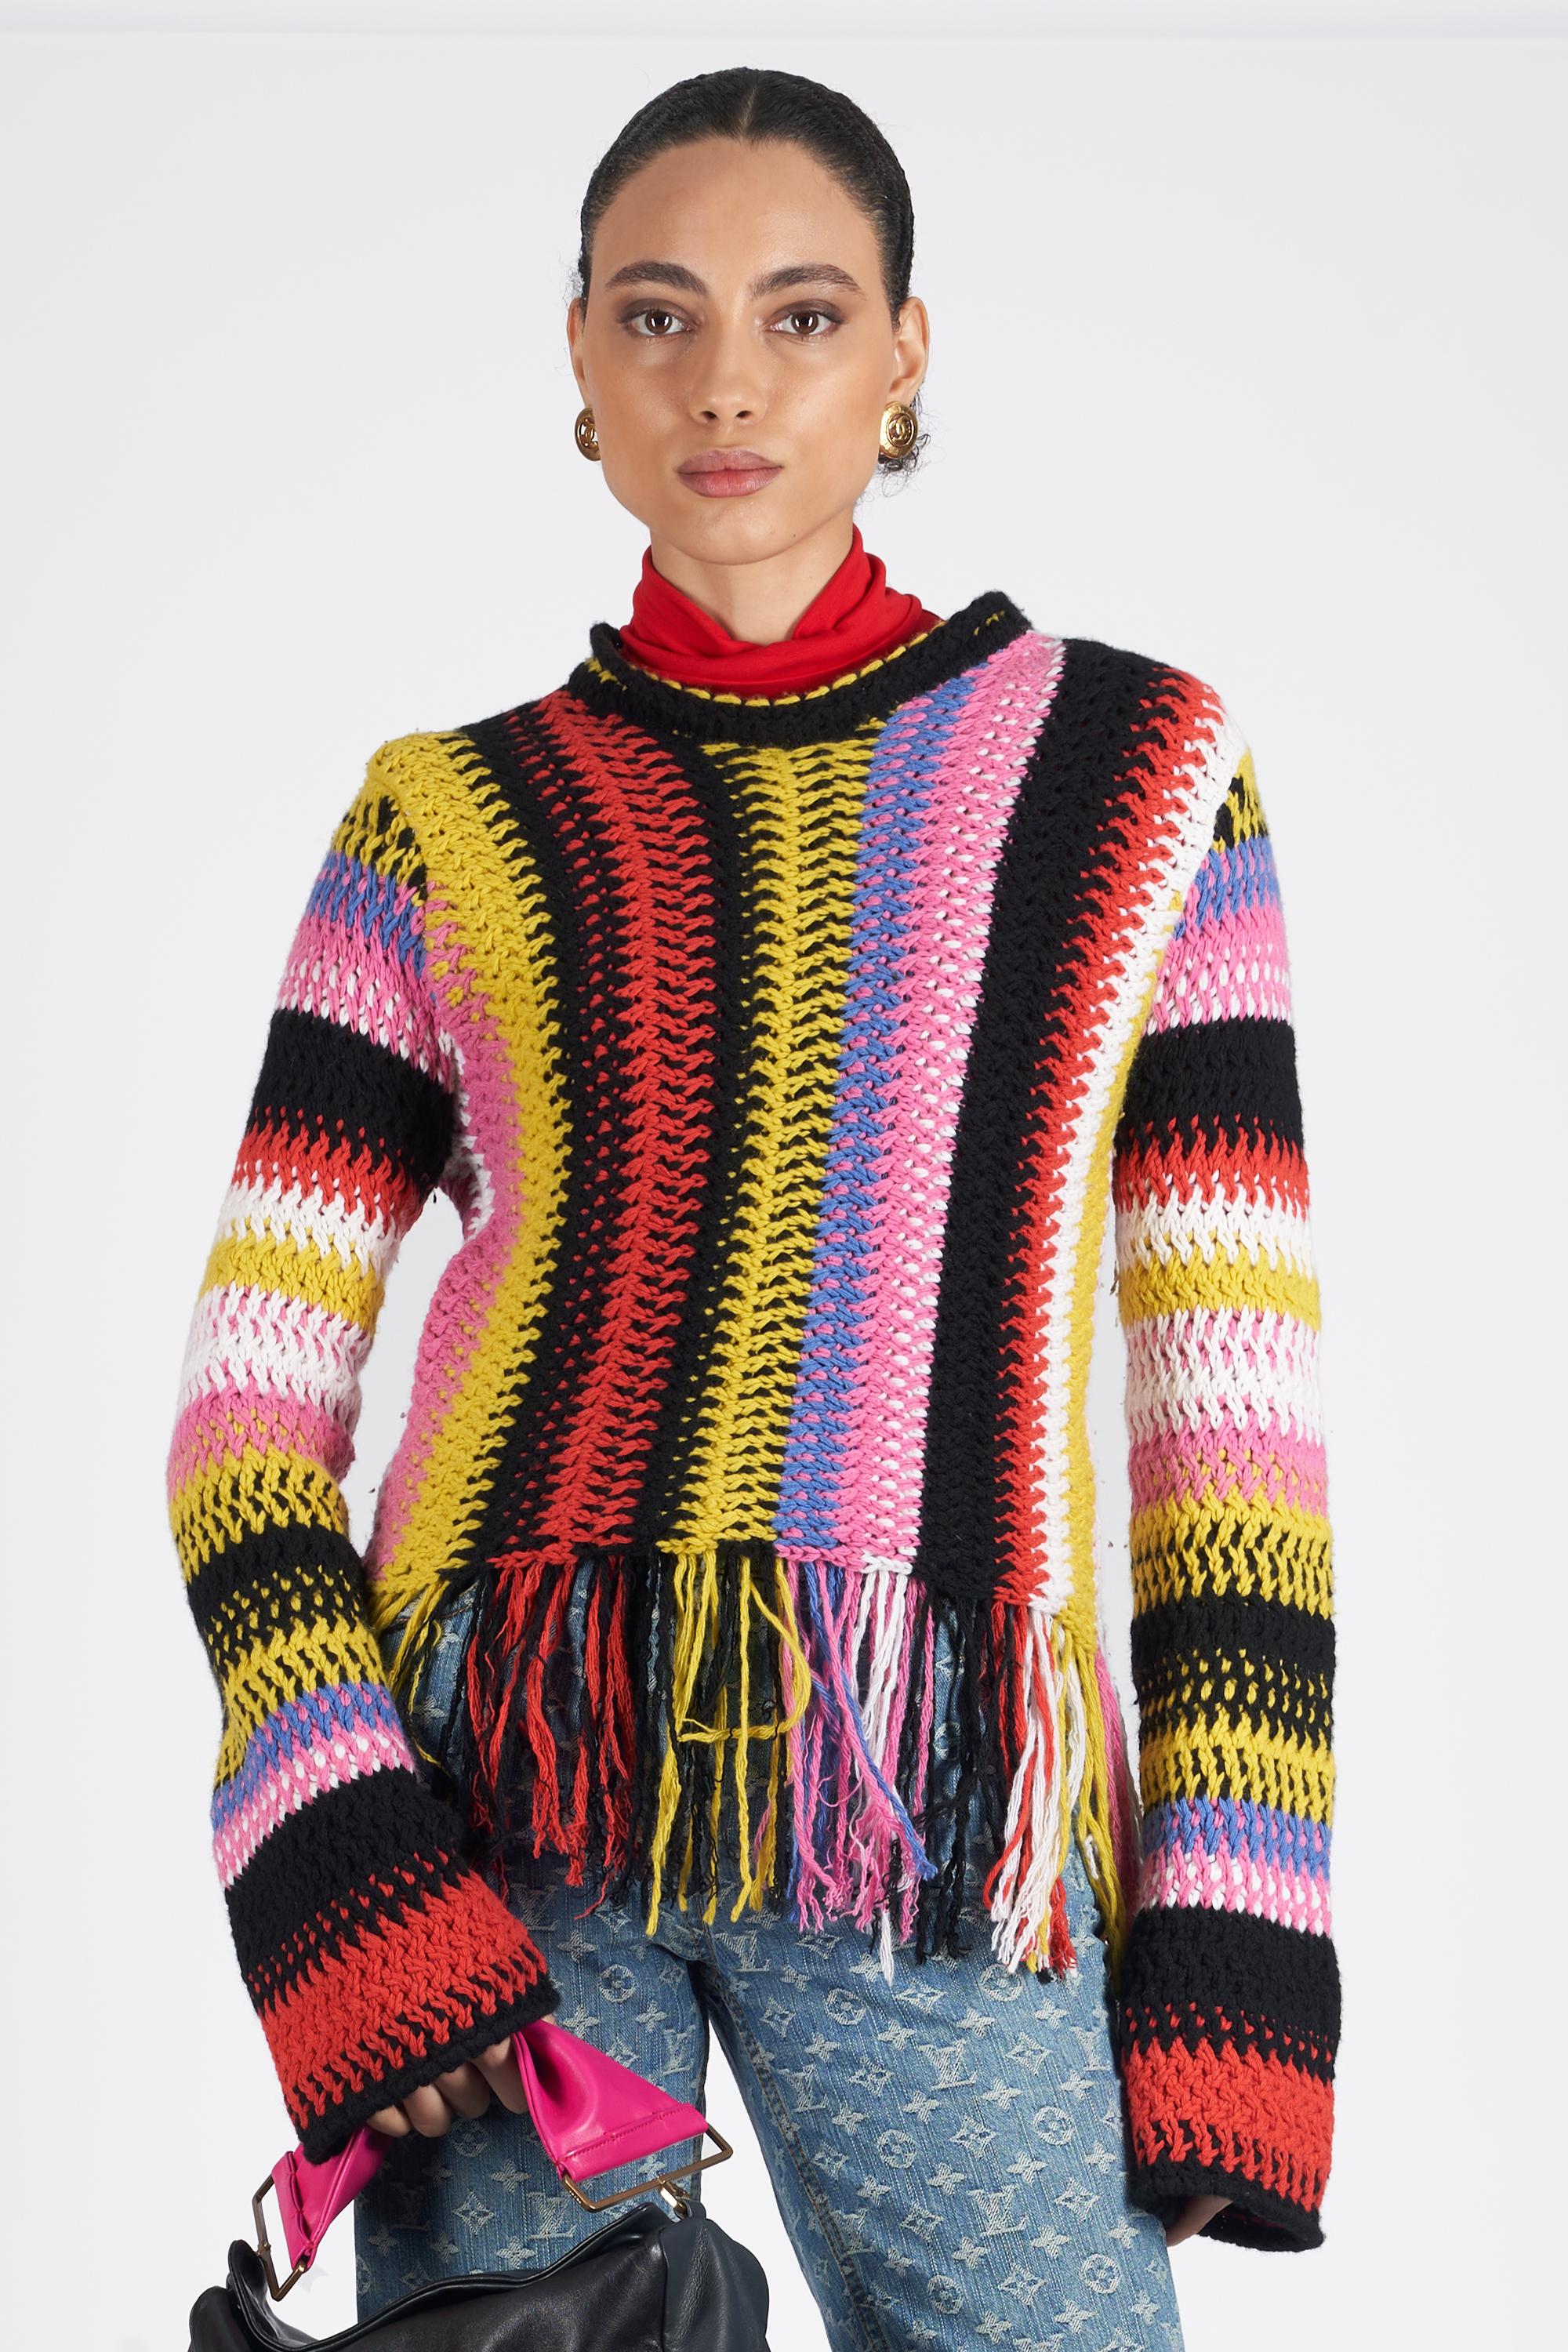 We are excited to present this Chloè multi coloured knitted jumper. Features long sleeves and tassels on the hem. In excellent vintage condition. Authenticity guaranteed.

Label size: S
Modern size: UK 8-10, US: 4-6, EU: 36-38
Fabric: Cashmere